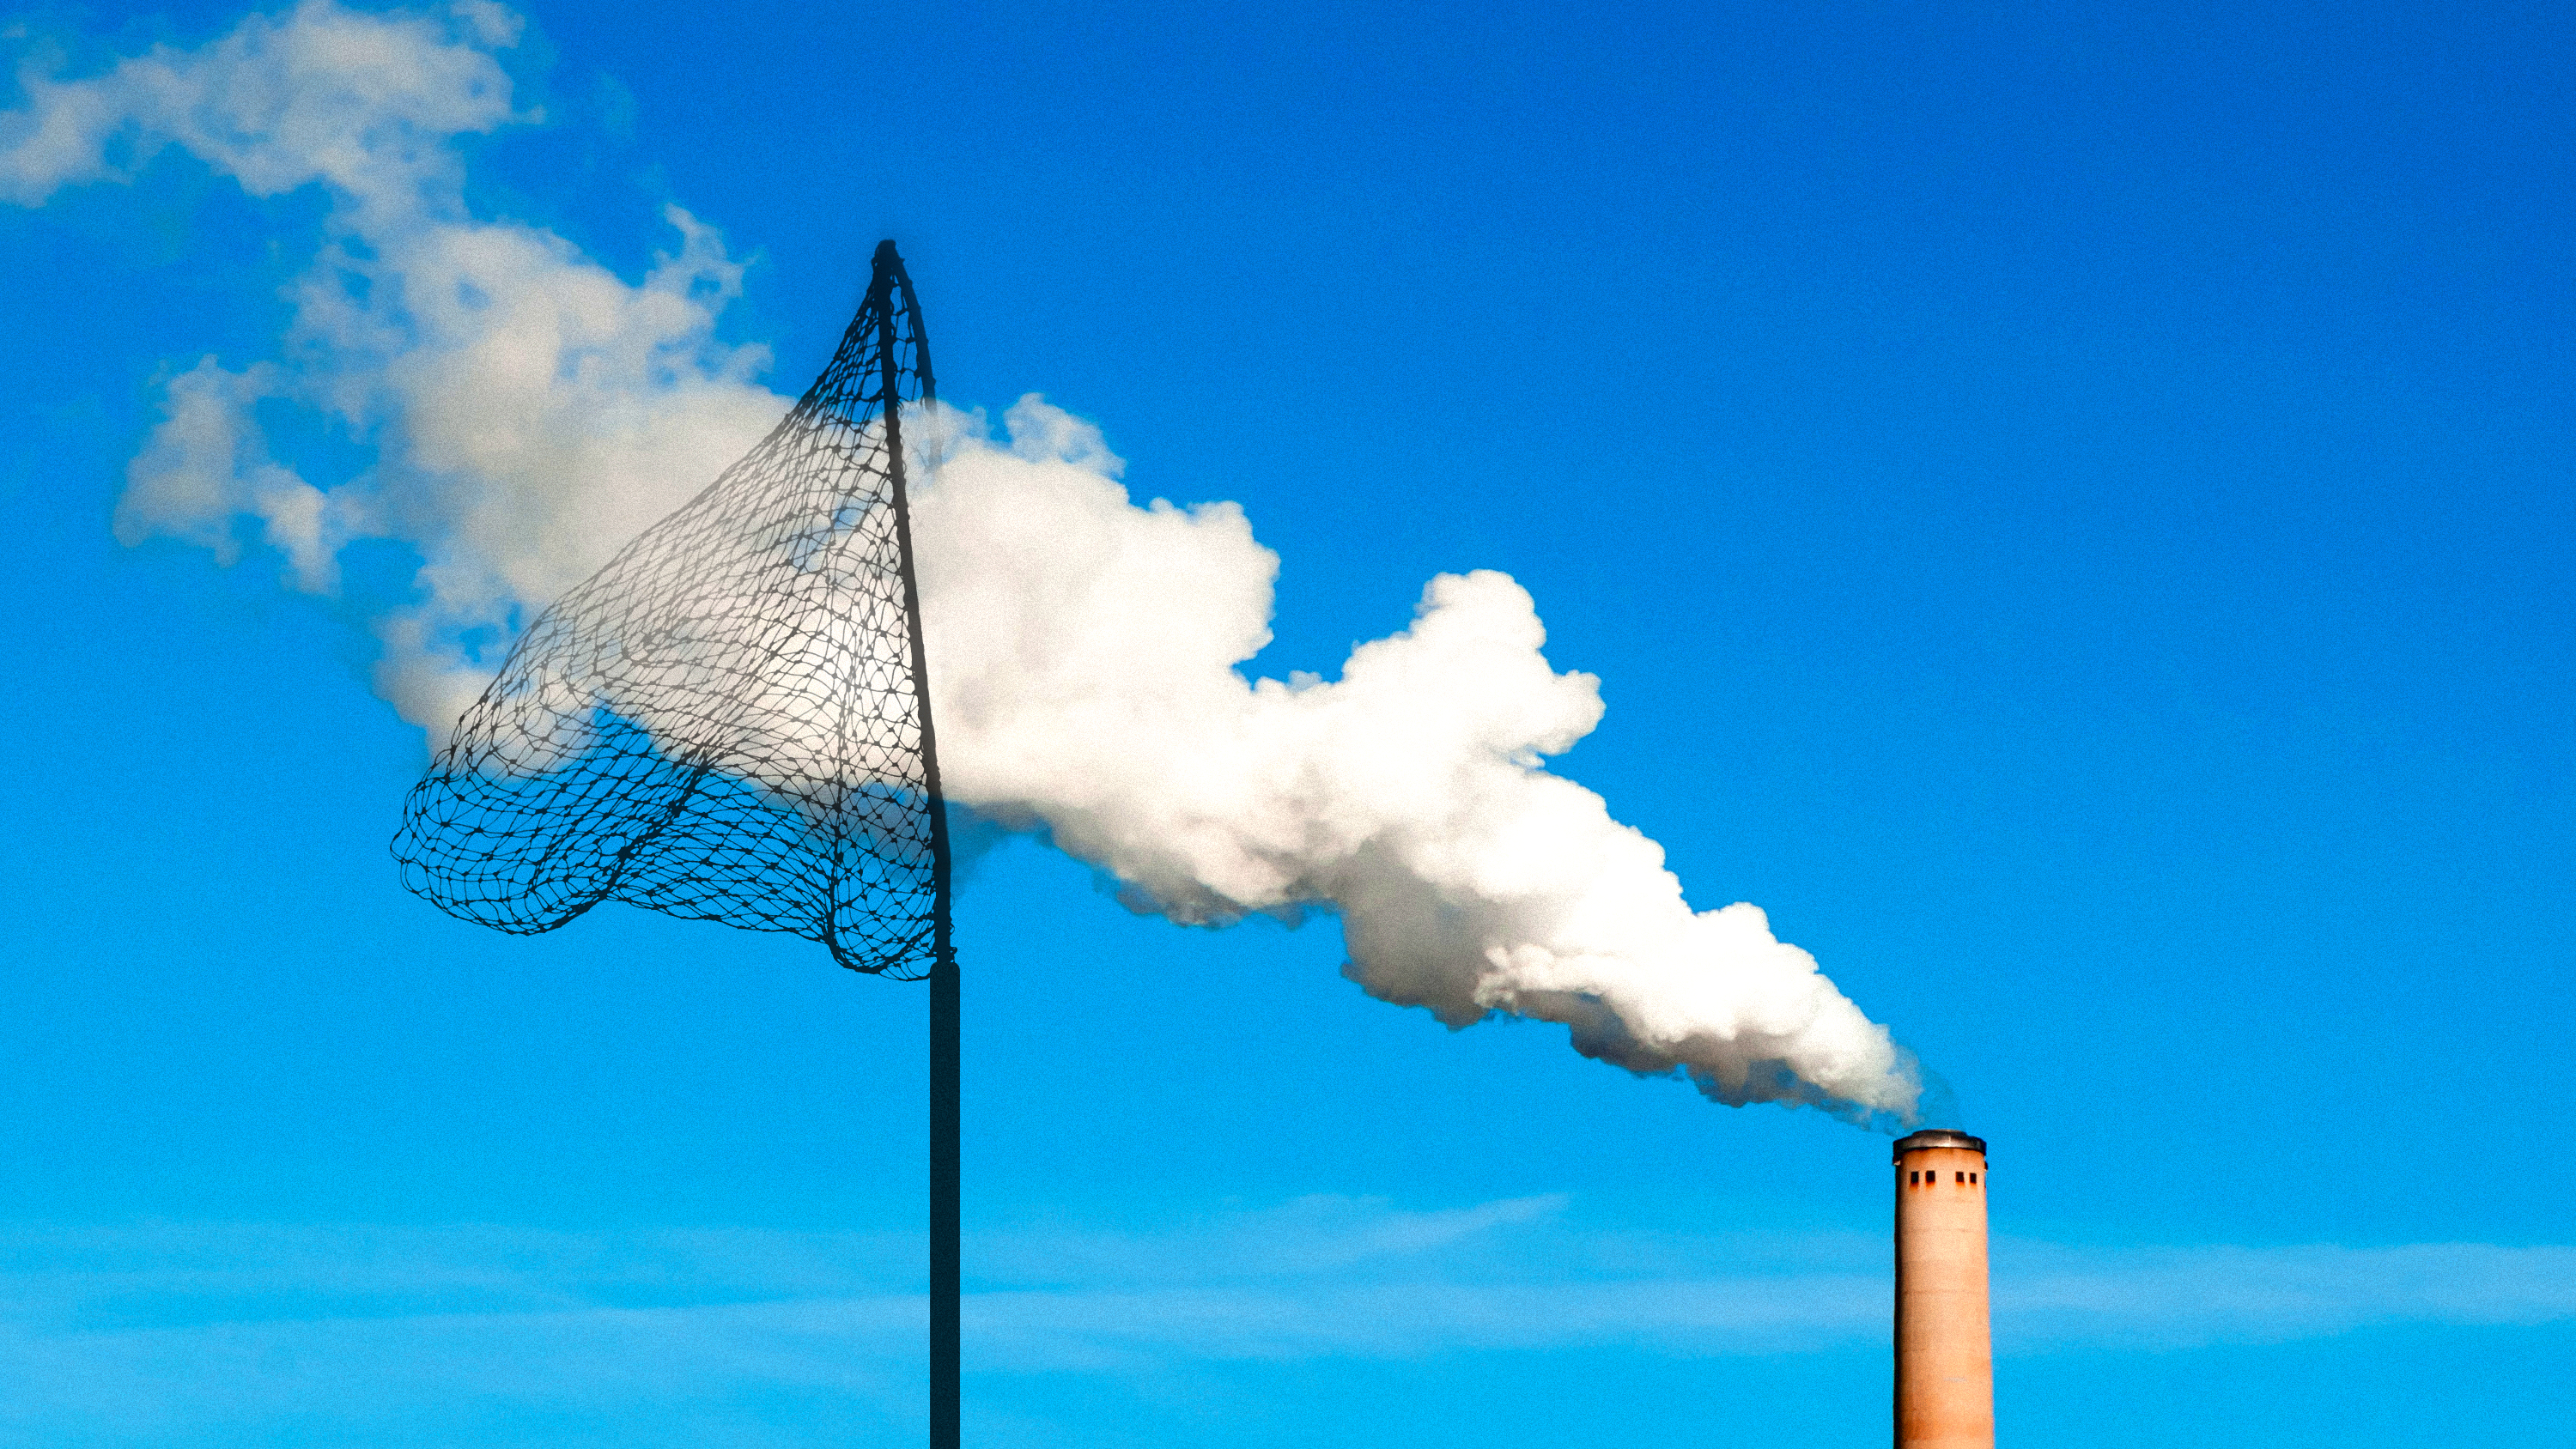 conceptual image showing a smoke stack blowing smoke into a large butterfly net